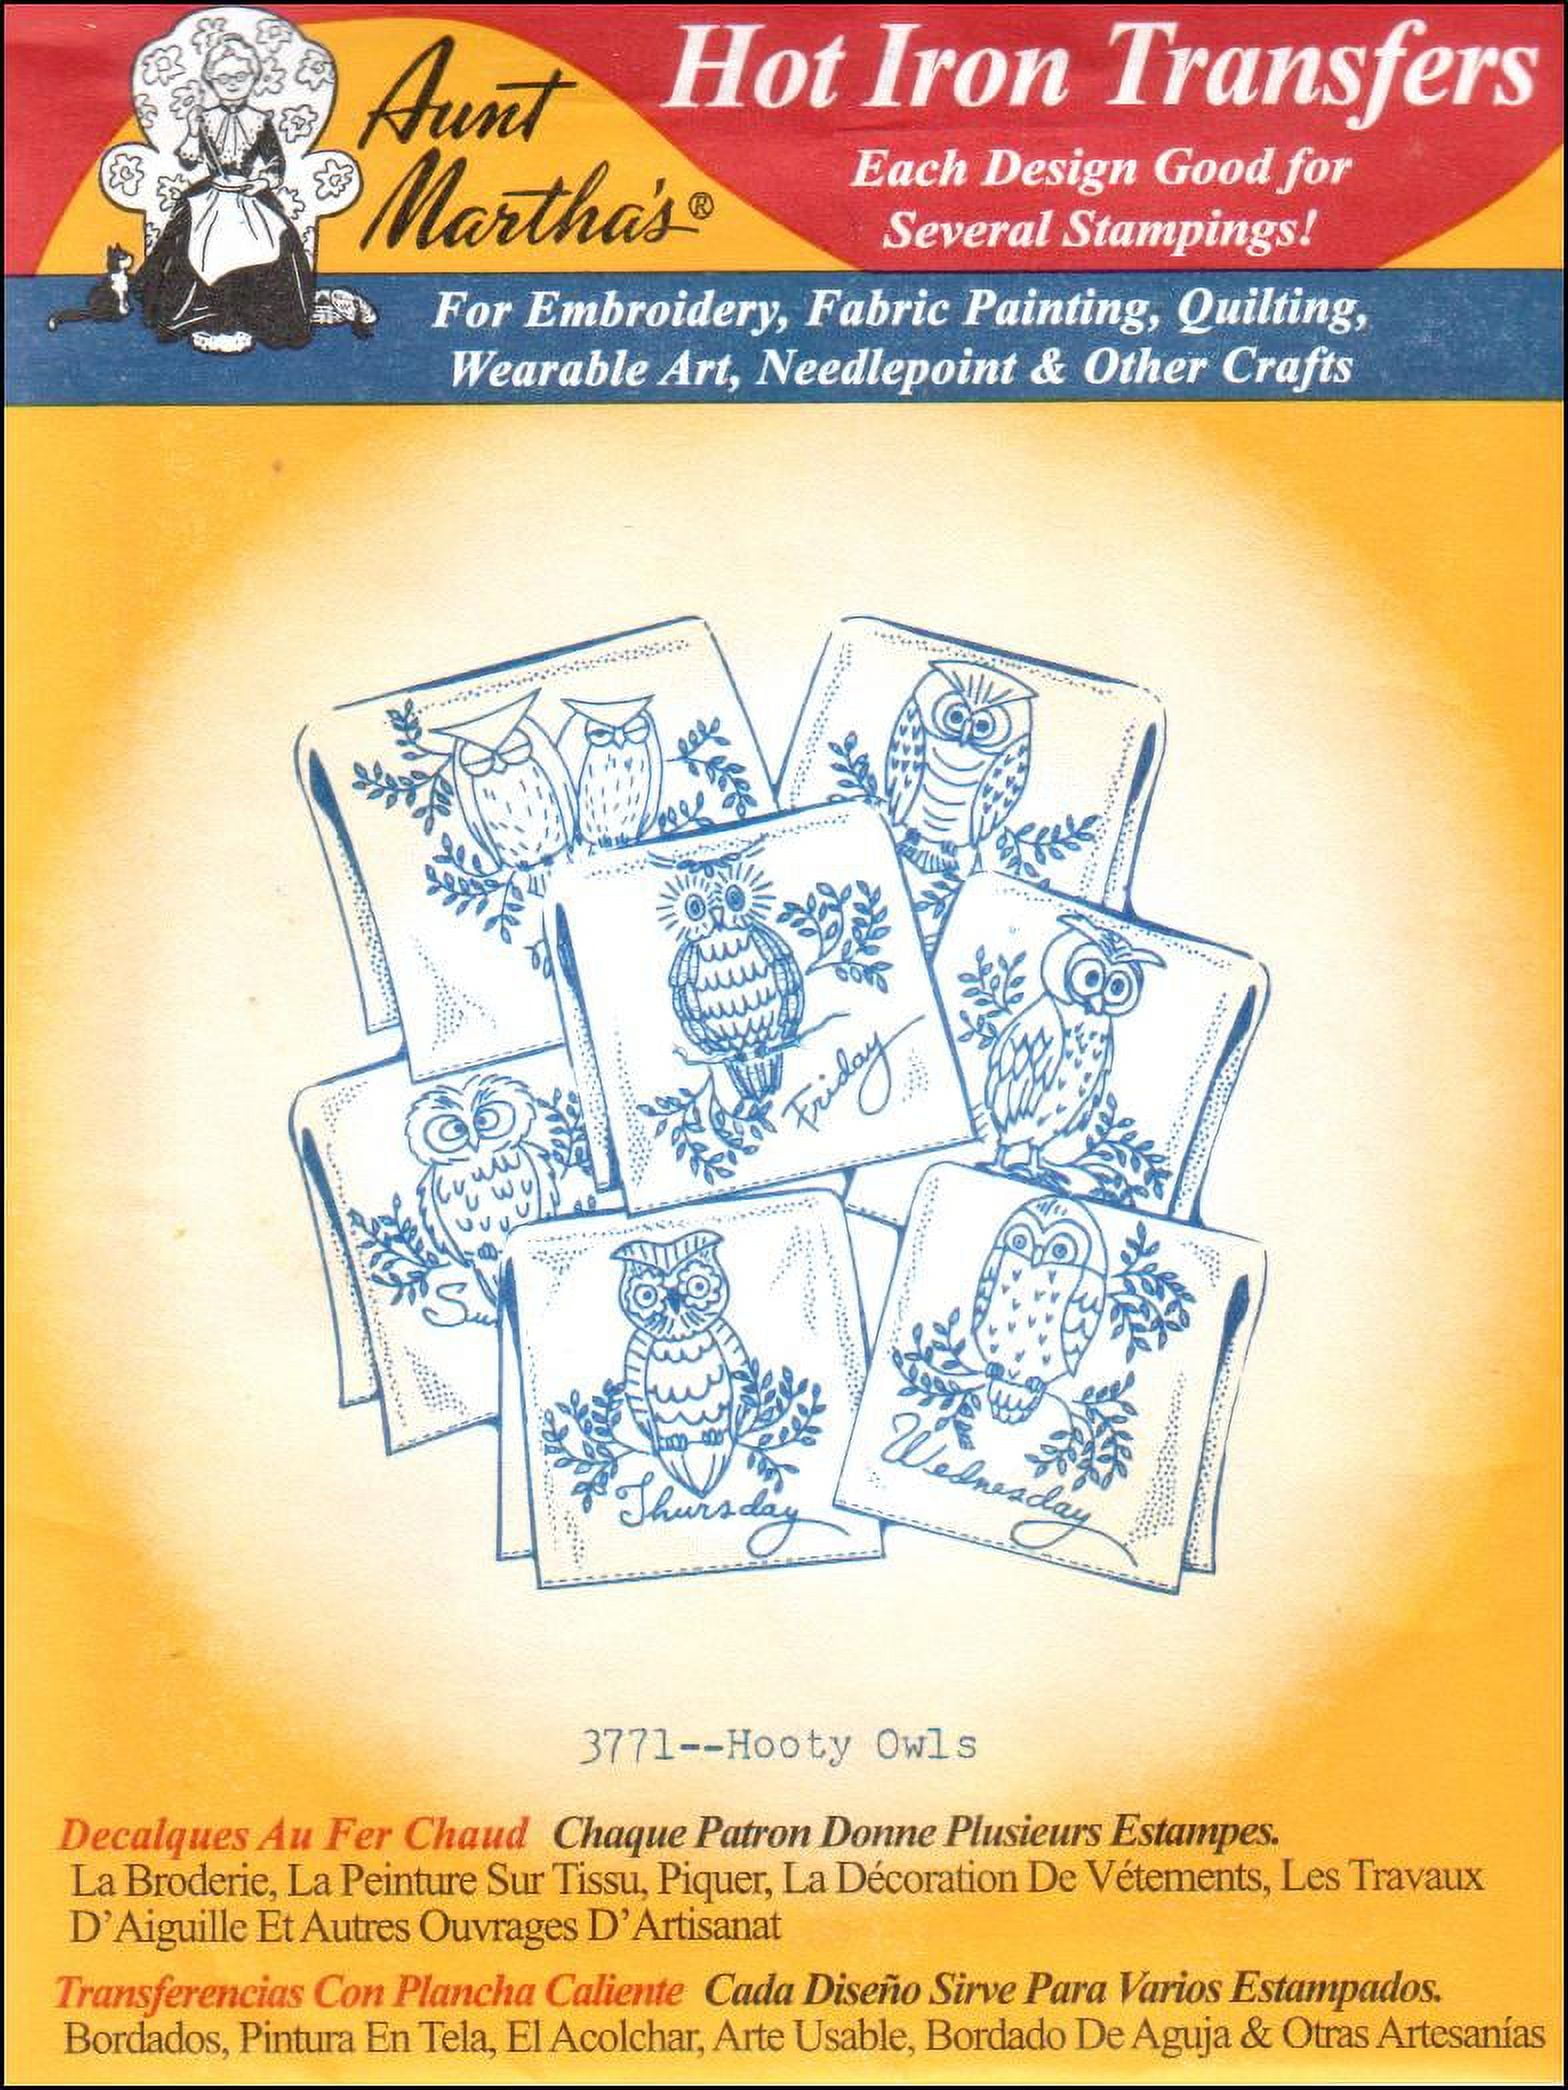 Aunt Martha's Hot Iron Transfers for Embroidery, Fabric Painting, & Other  Crafts